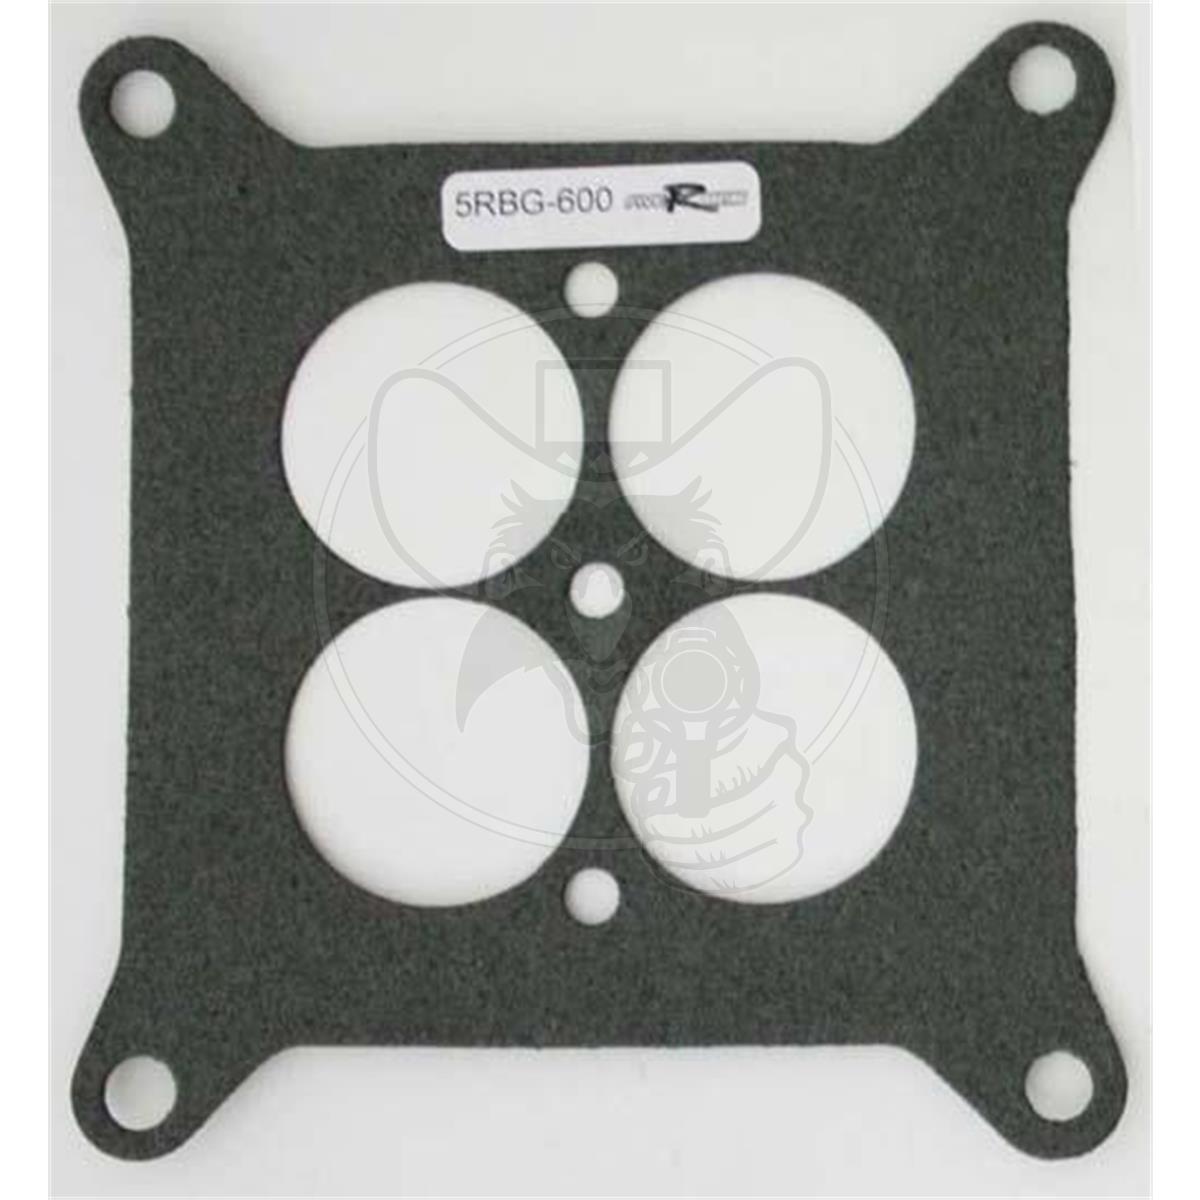 5R RACING 4 BL SQUARE BORE 4-HOLE BASE GASKET FITS HOLLEY CARBY